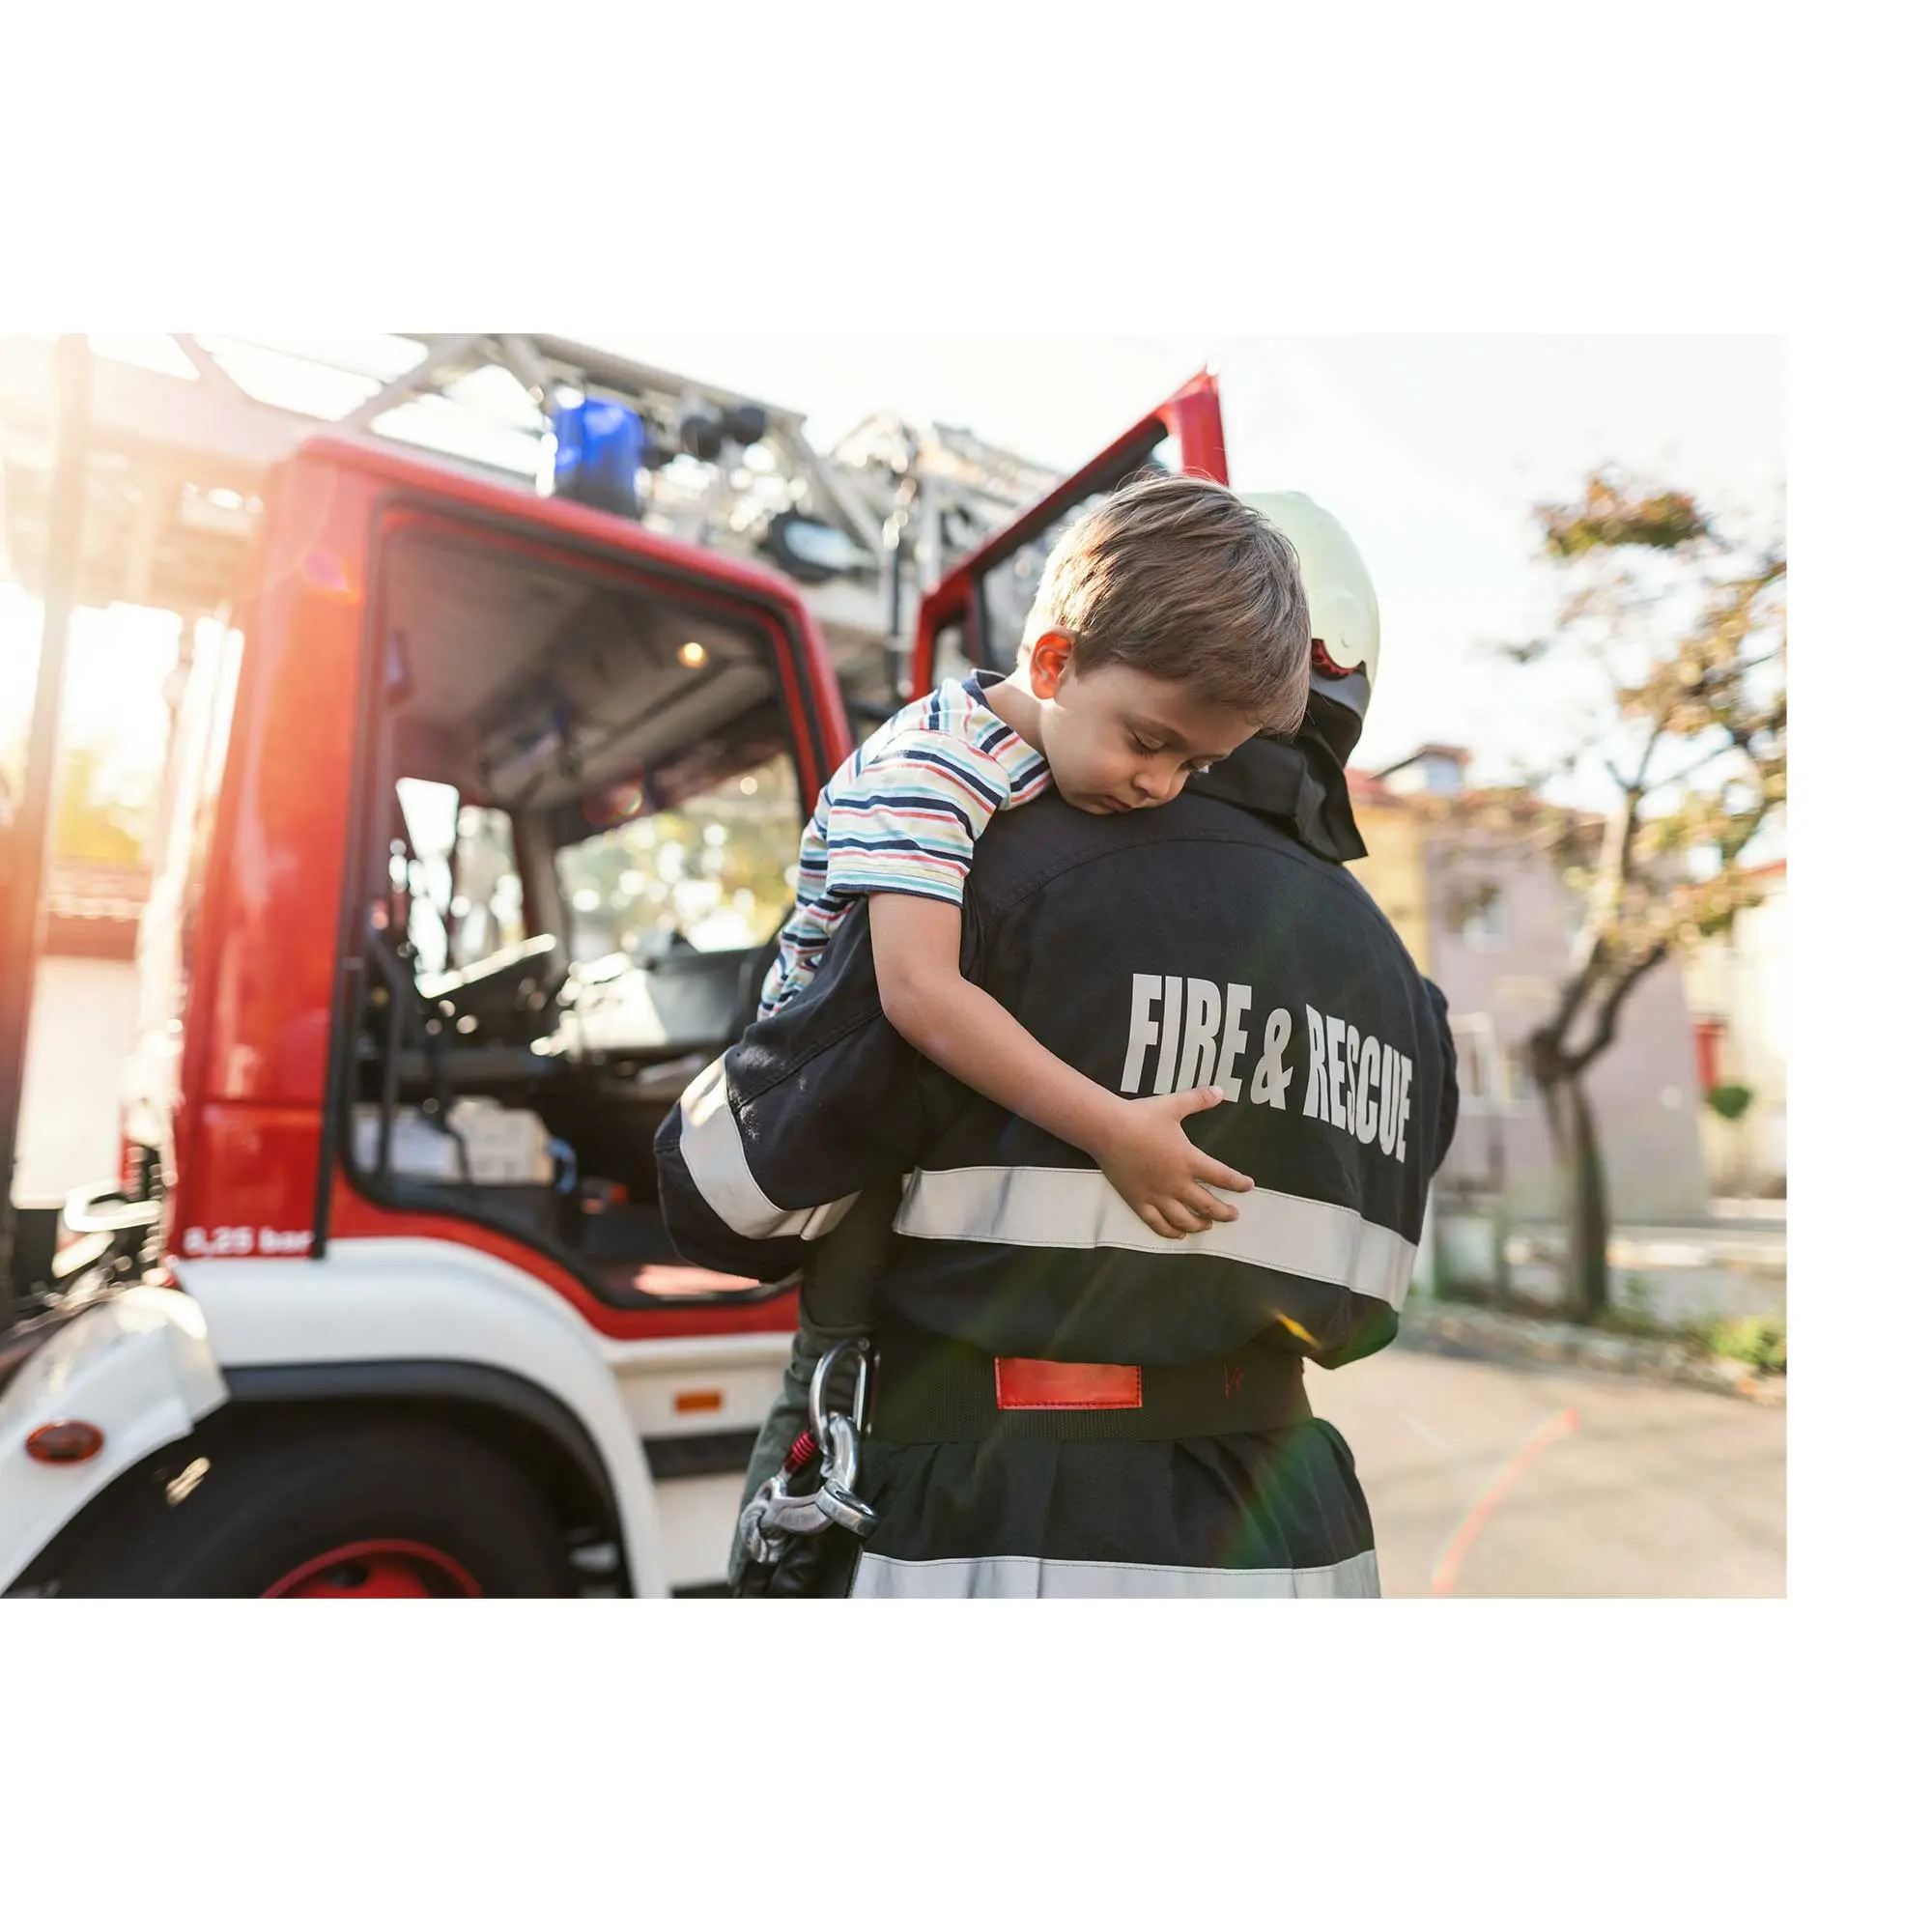 A fire and rescue in full uniform carrying a small child toward a fire truck.